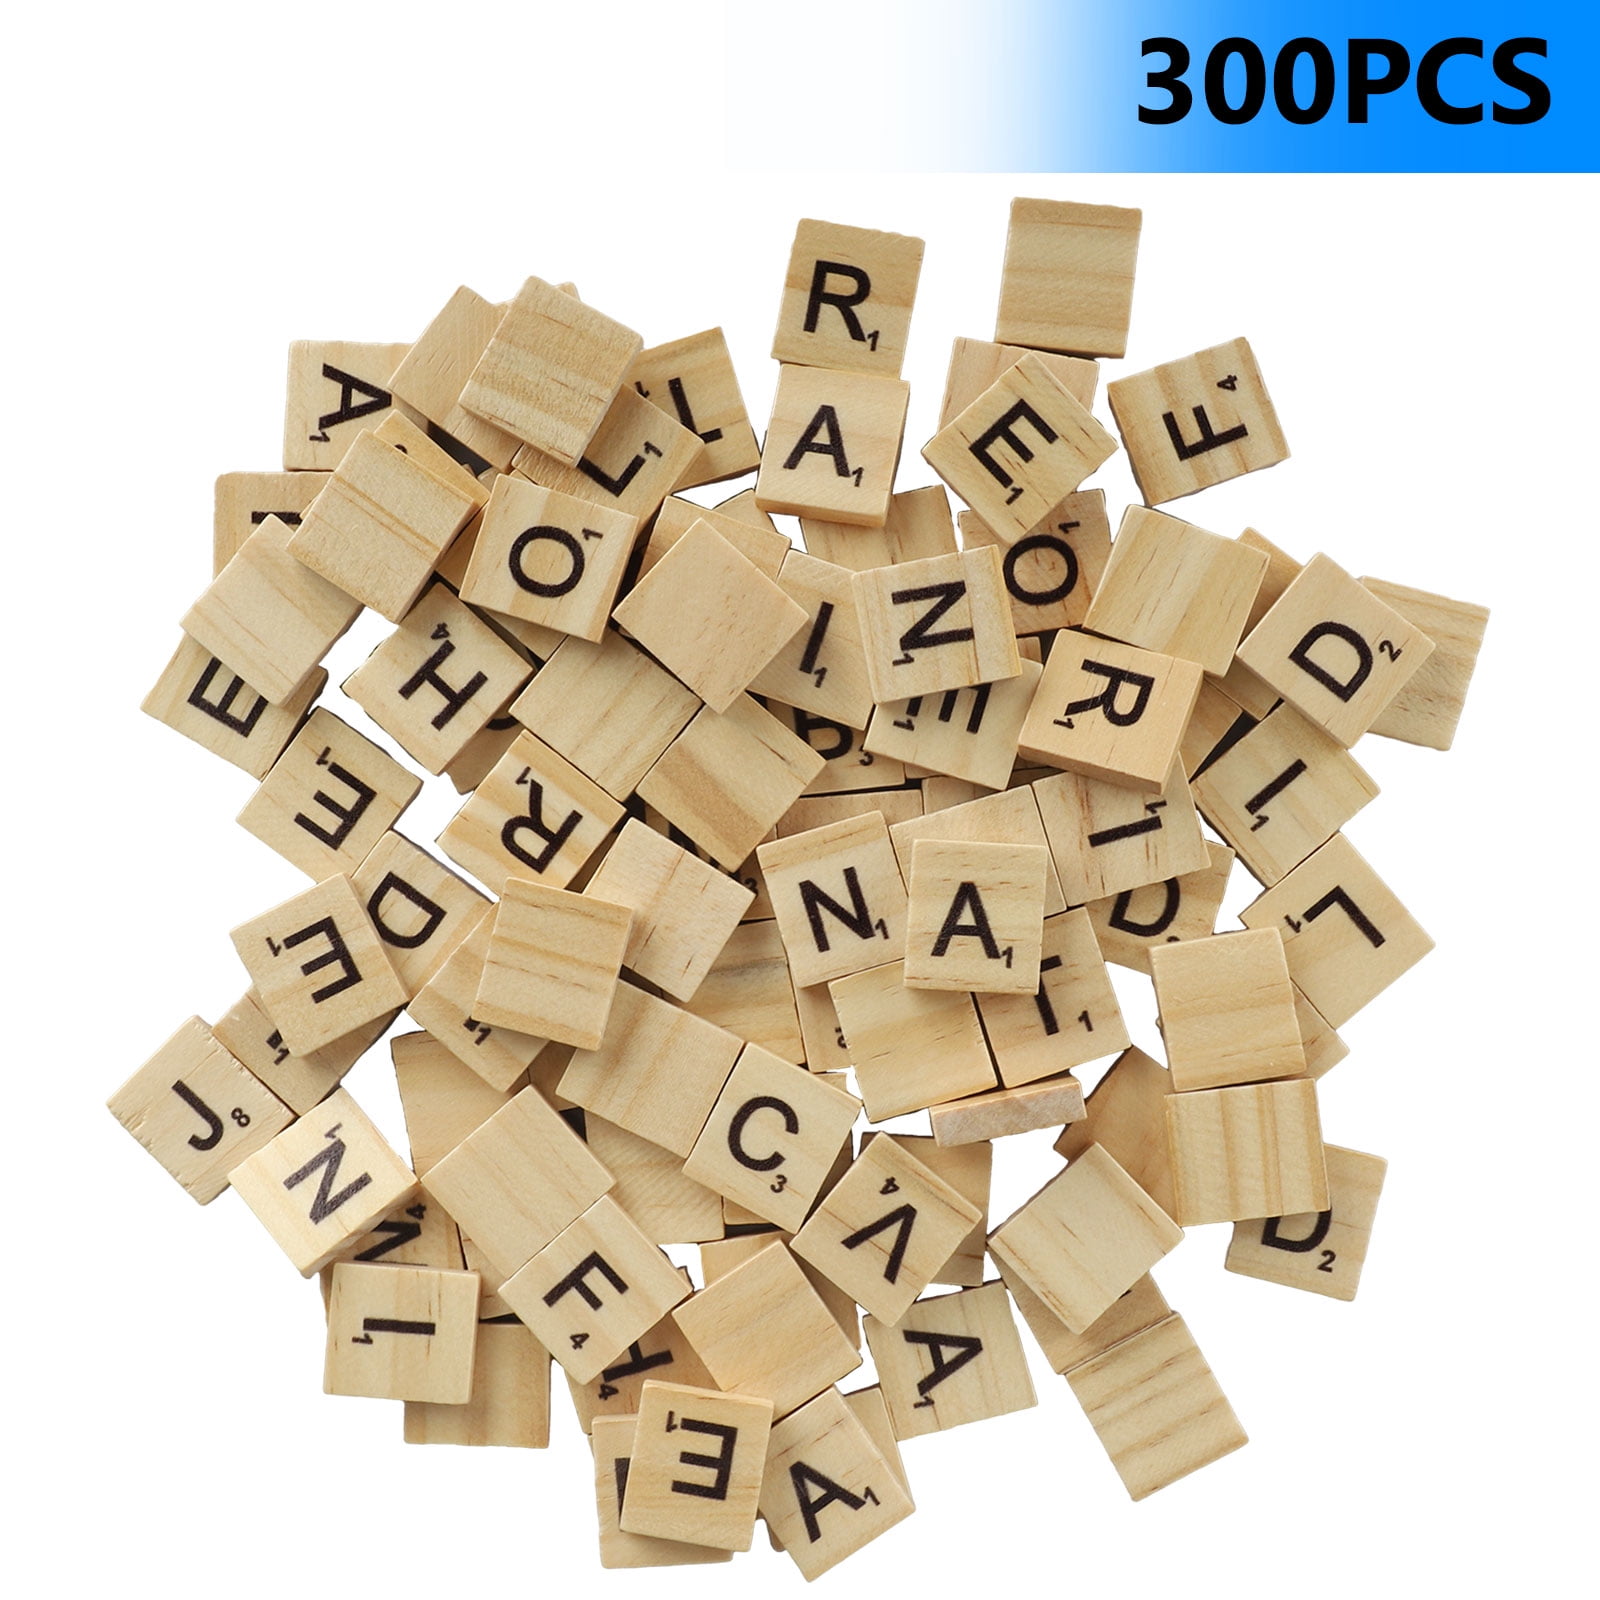 SCRABBLE 100 ROUND BACK TILES Green Spares Replacements Craft 